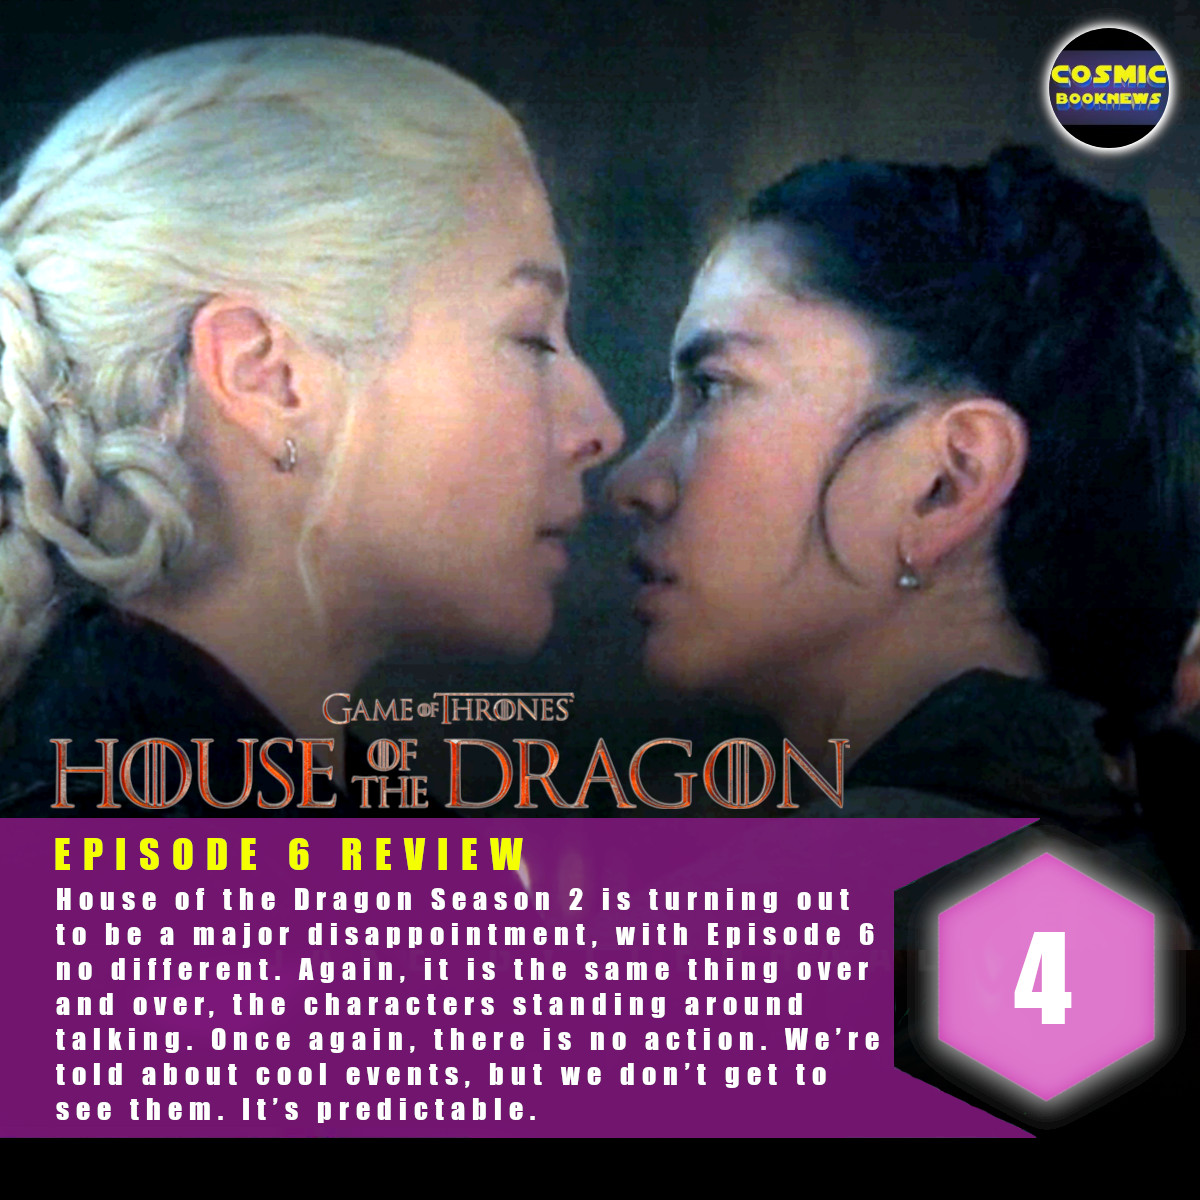 housedragonep6review